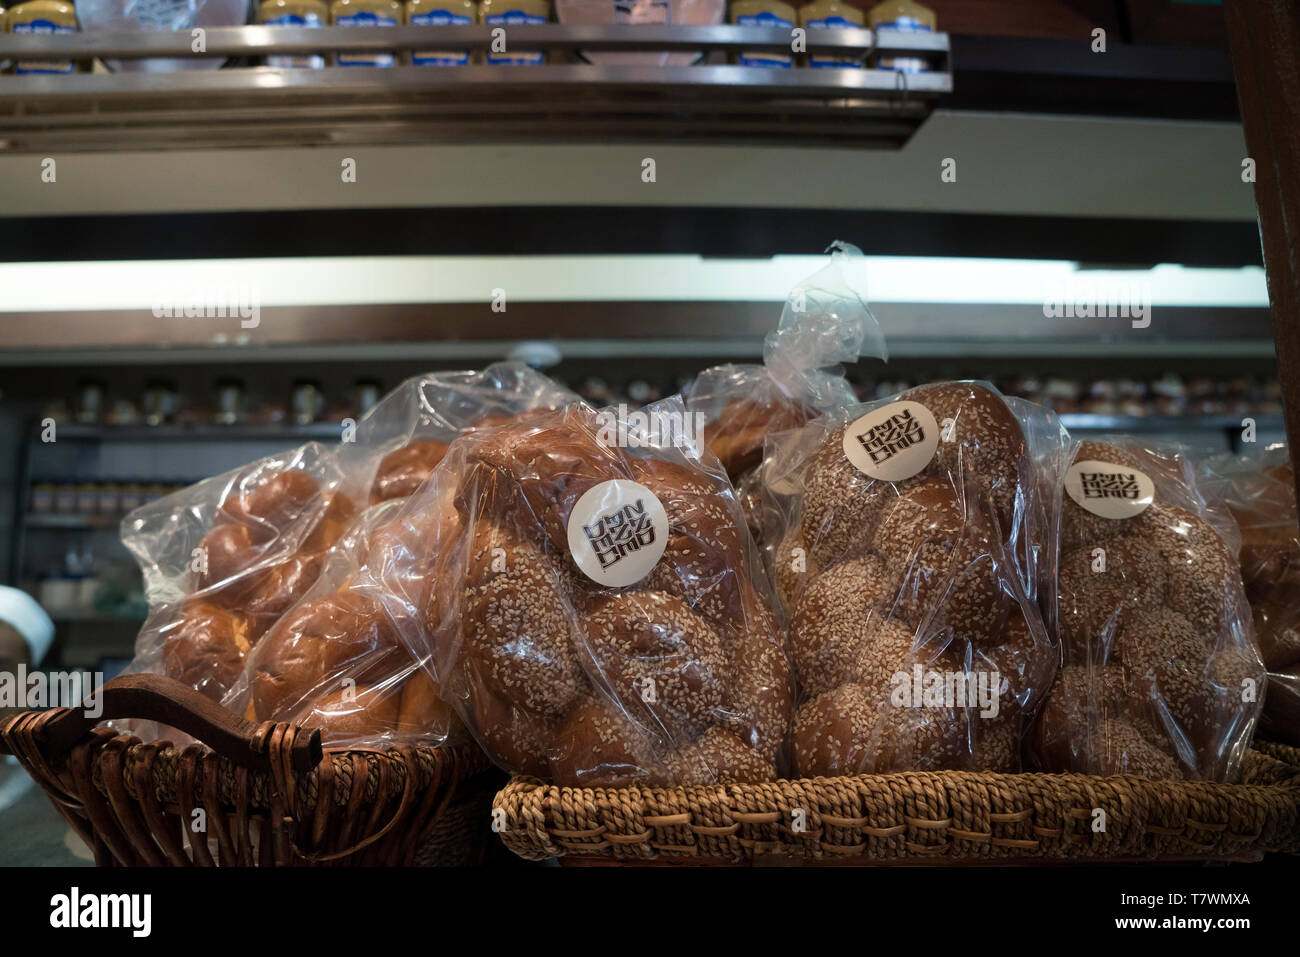 Challah bread for sale at the 2nd Avenue Deli on the Upper East Side of Manhattan. Stock Photo